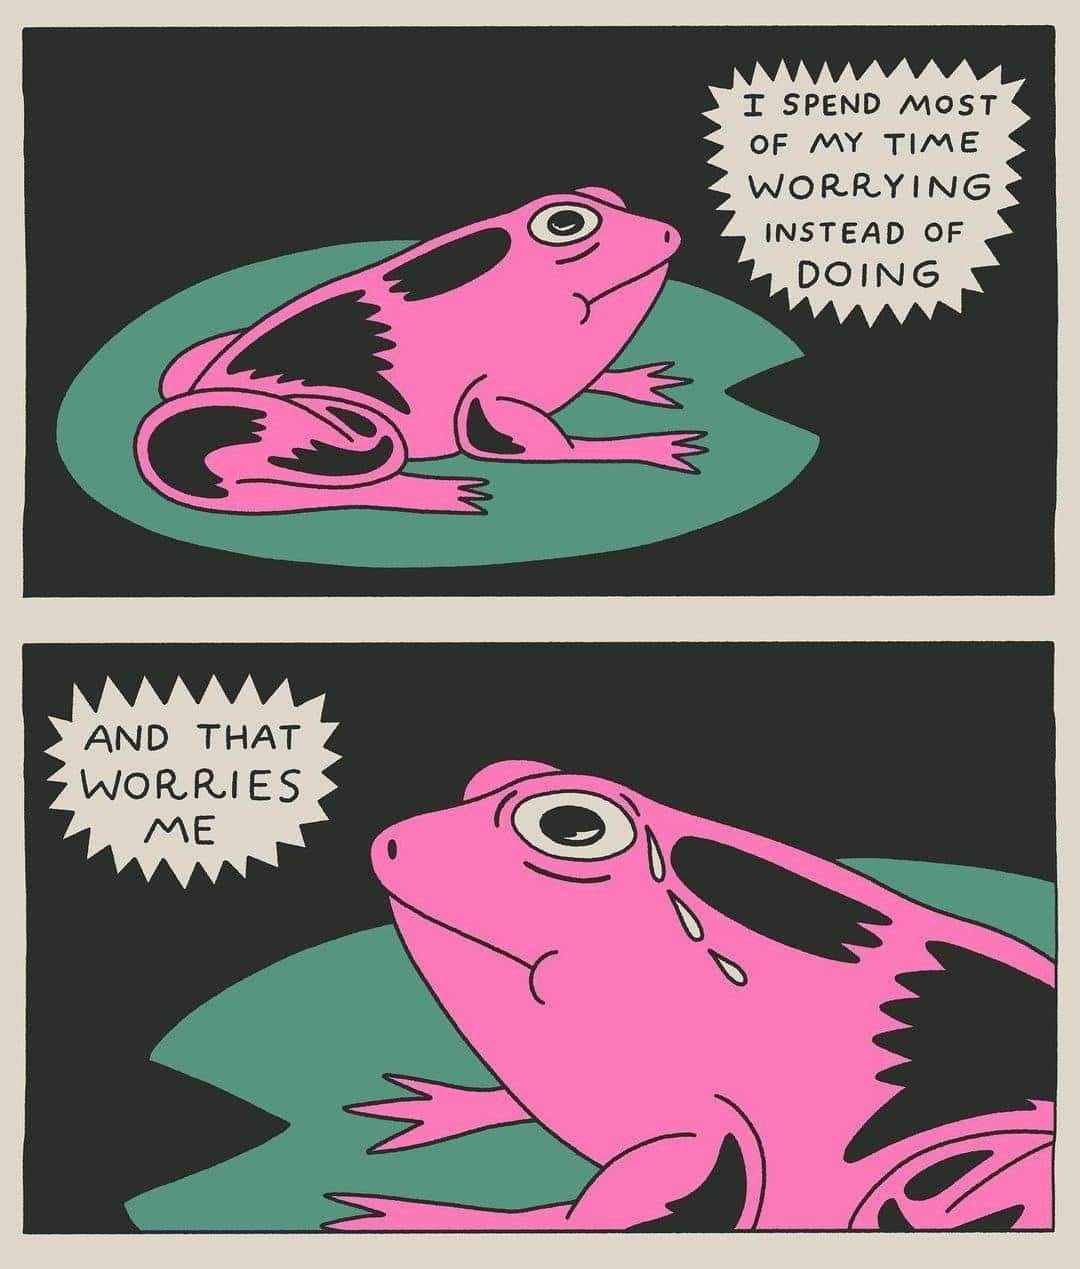 i spend most of my time worrying instead of doing, and that worries me, frog